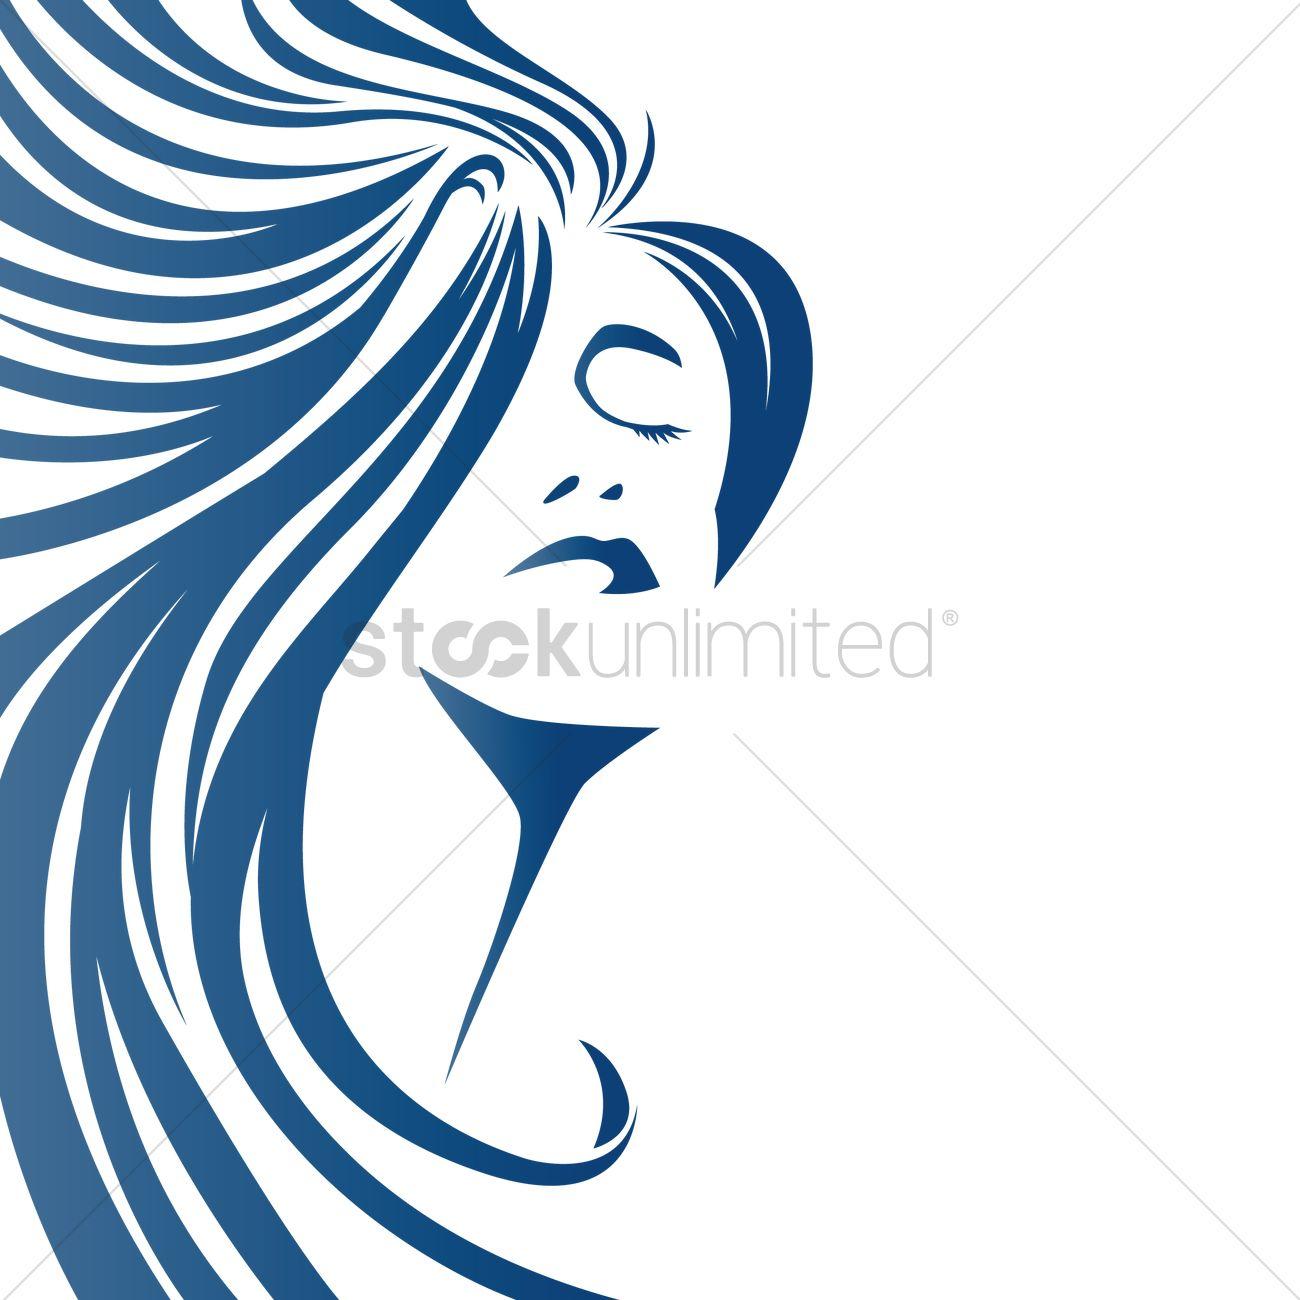 Lady with Flowing Hair Logo - Artistic design of woman with flowing hair Vector Image